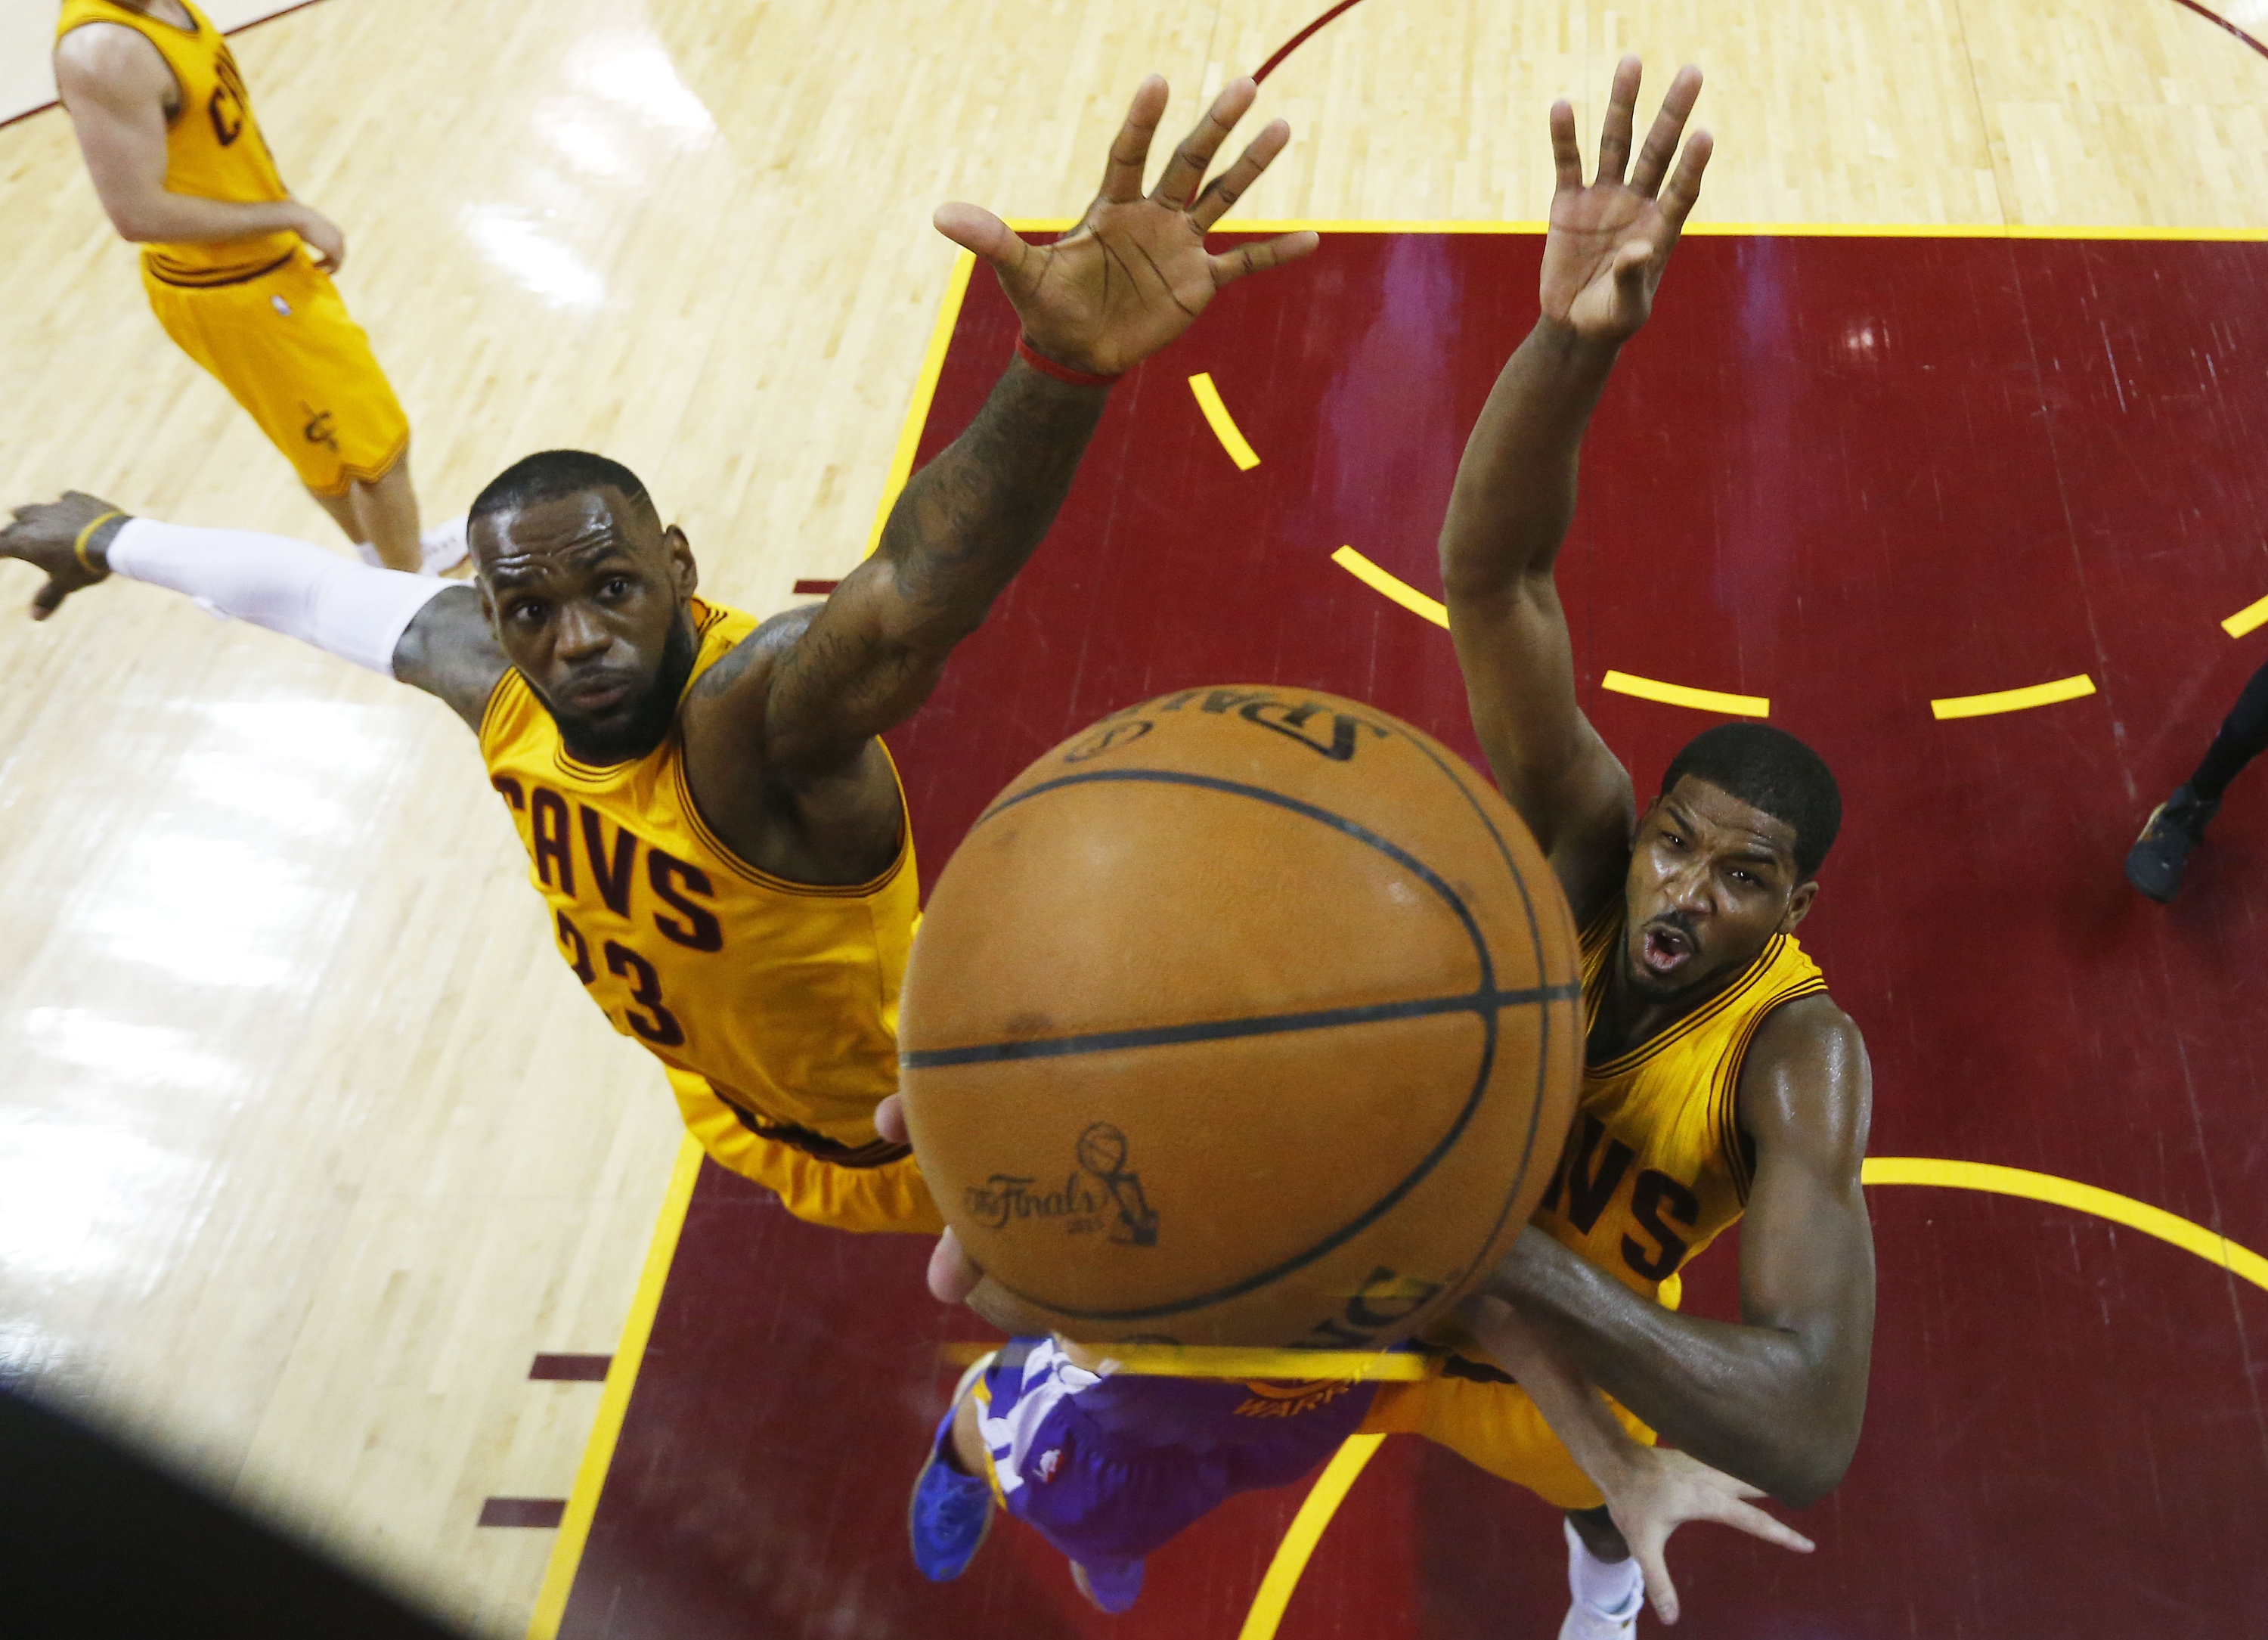 LeBron James and Tristan Thompson reach for a common goal. (Larry W. Smith-Pool/Getty Images)